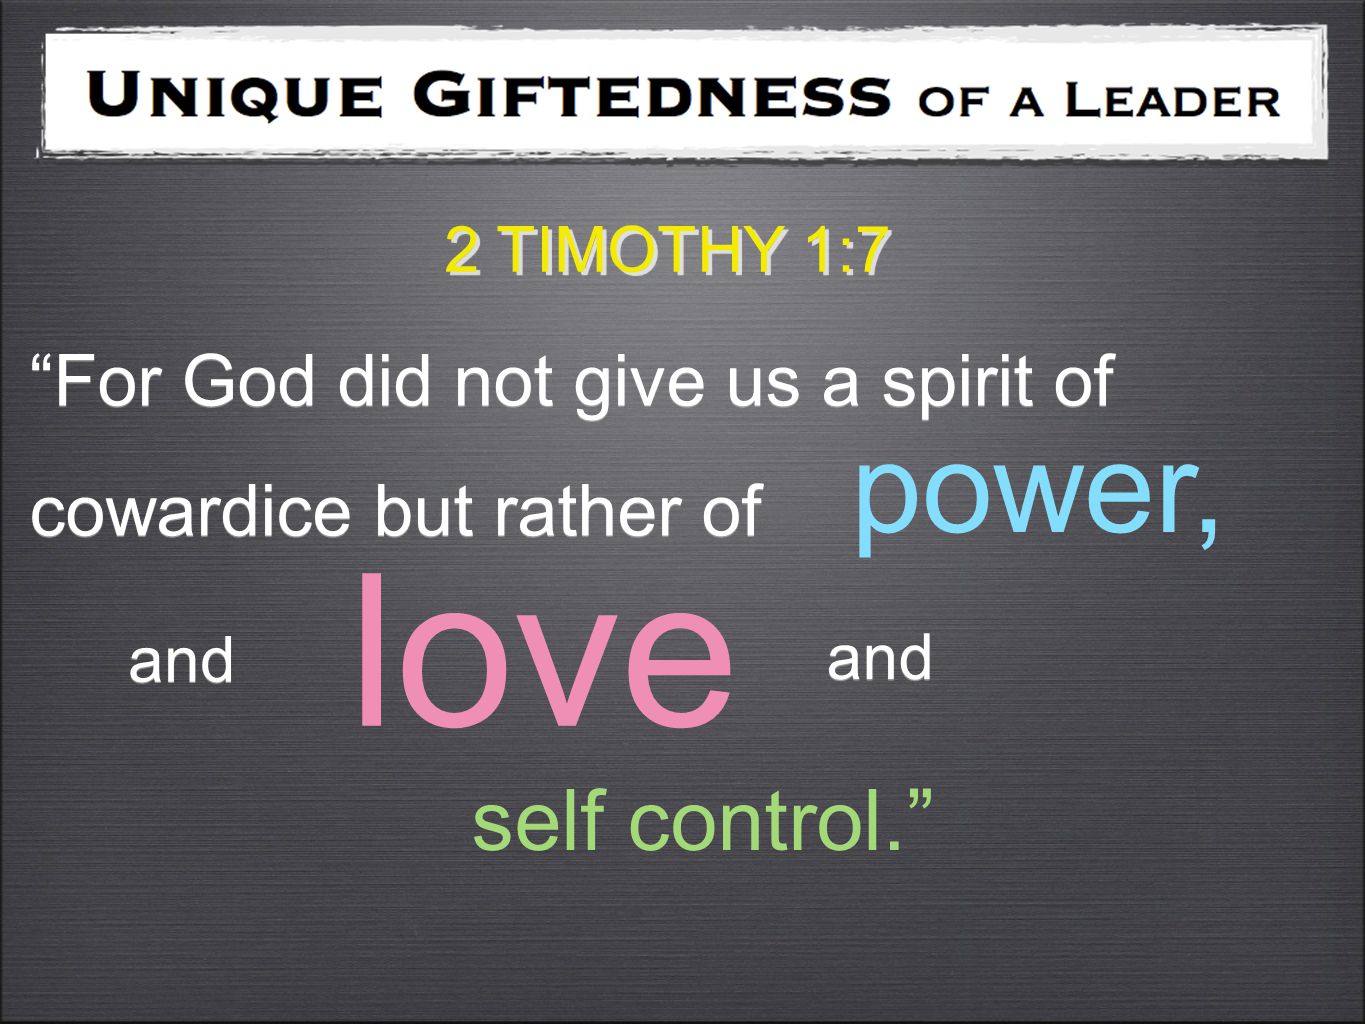 For God did not give us a spirit of cowardice but rather of For God did not give us a spirit of cowardice but rather of power, and self control. love and 2 TIMOTHY 1:7